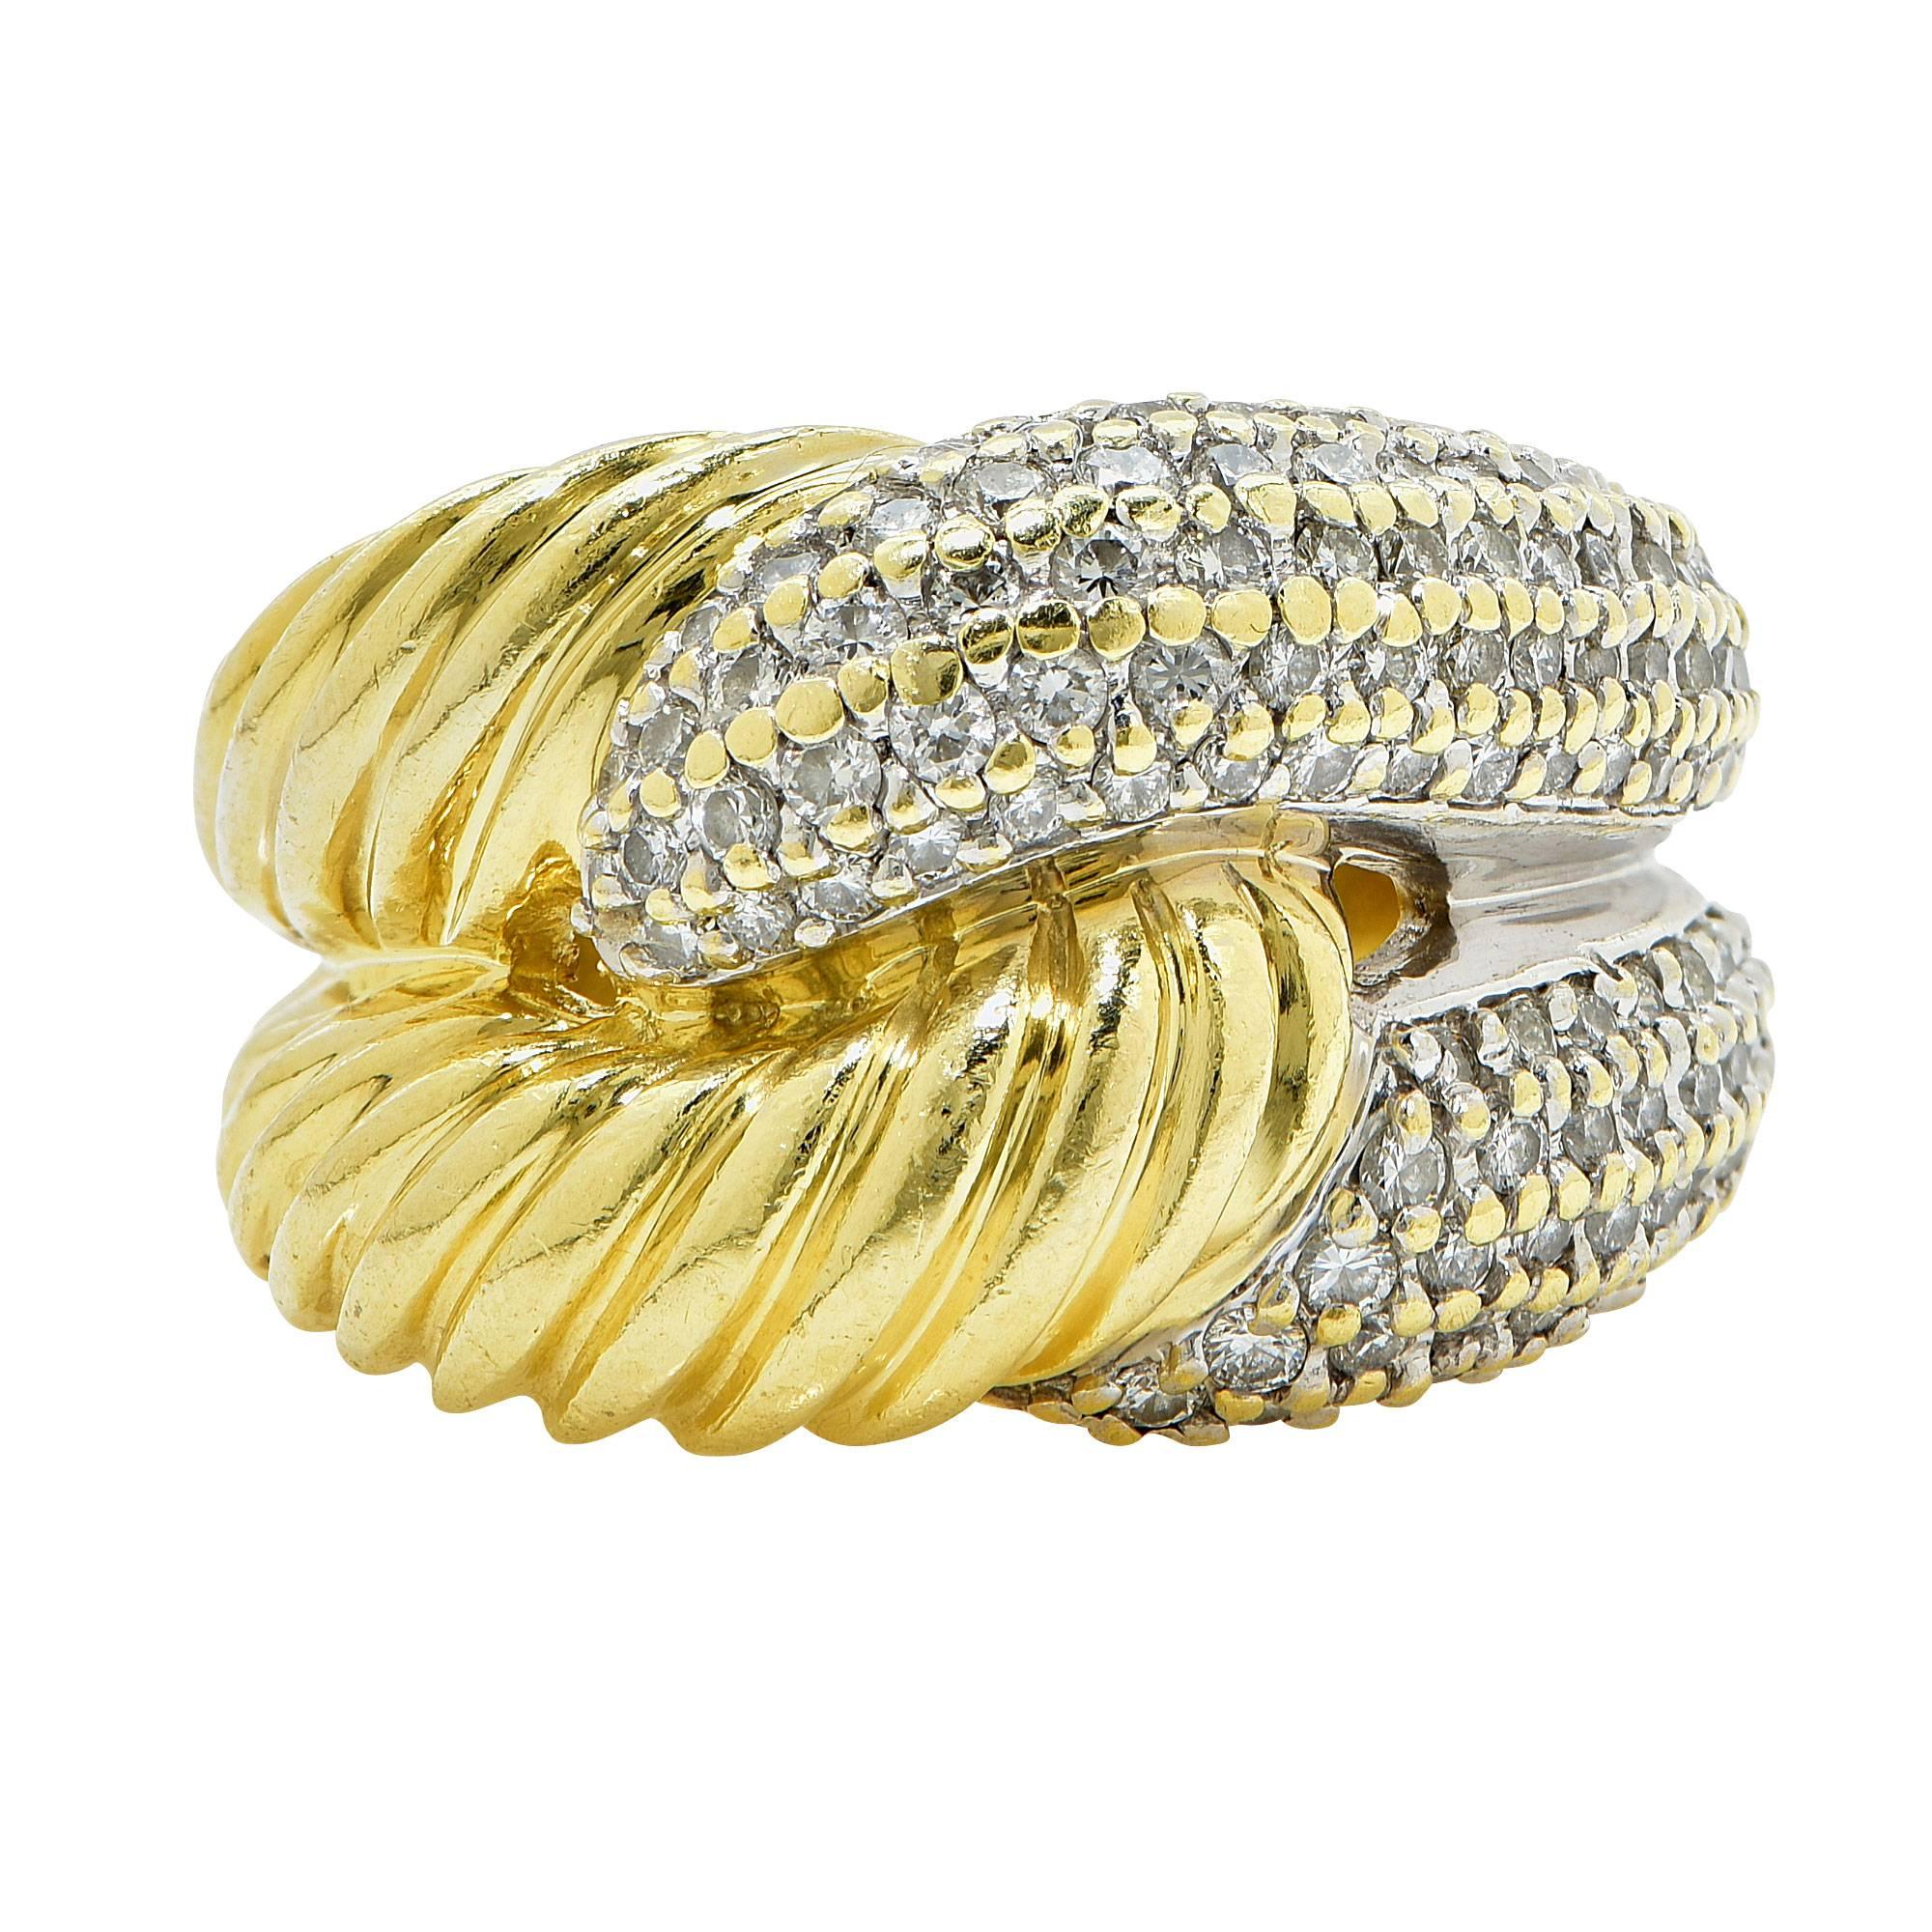 18k yellow gold David Yurman ring featuring 86 round brilliant cut diamonds weighing approximately 1.20cts G color VS-SI clarity.

Metal weight: 17.72 grams

This diamond ring is accompanied by a retail appraisal performed by a GIA Graduate